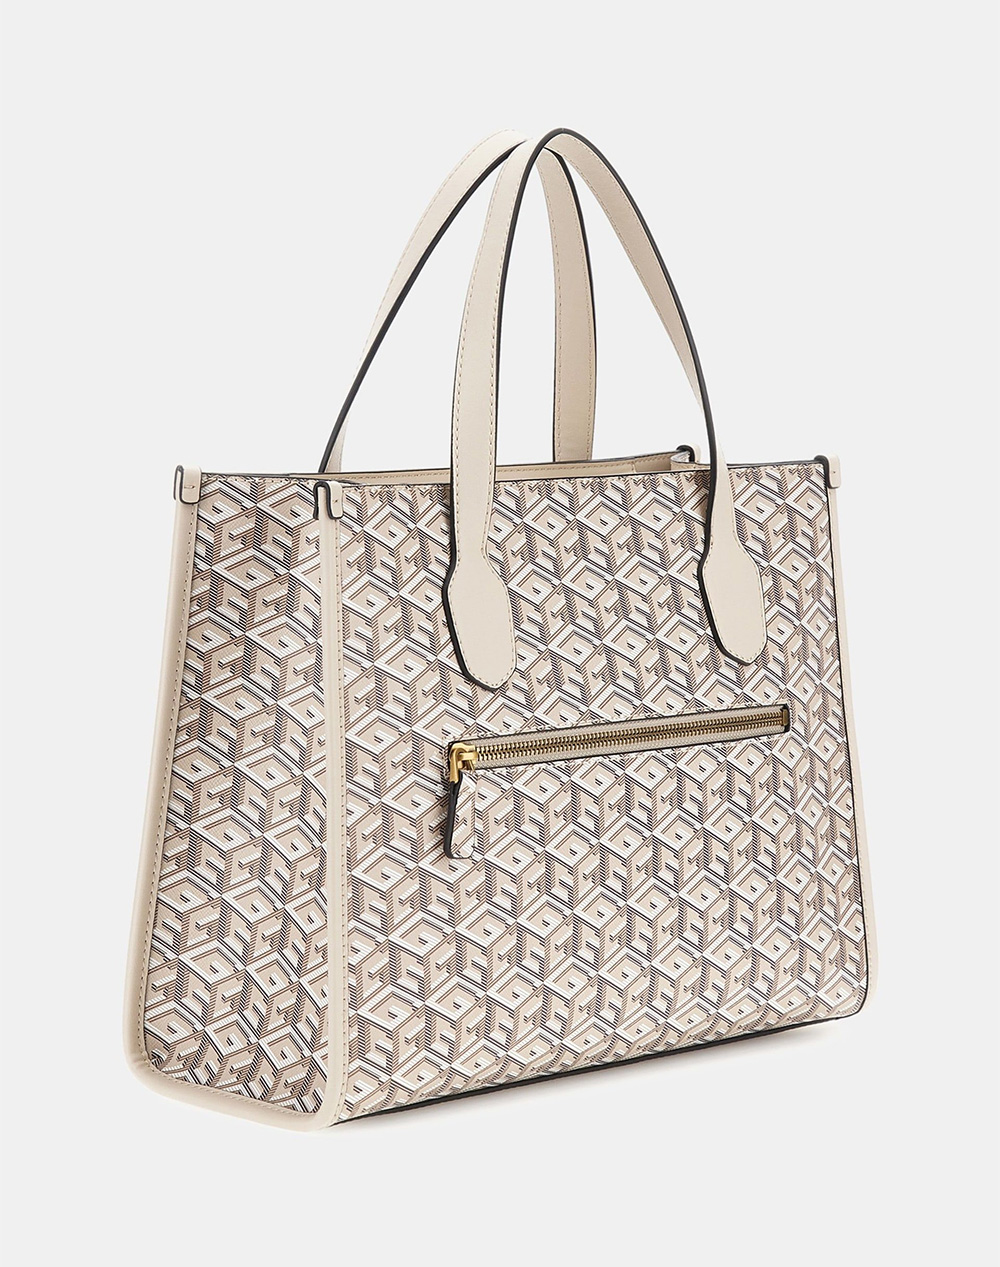 GUESS SILVANA 2 COMPARTMENT TOTE (Διαστάσεις: 34 x 26 x 13 εκ.)